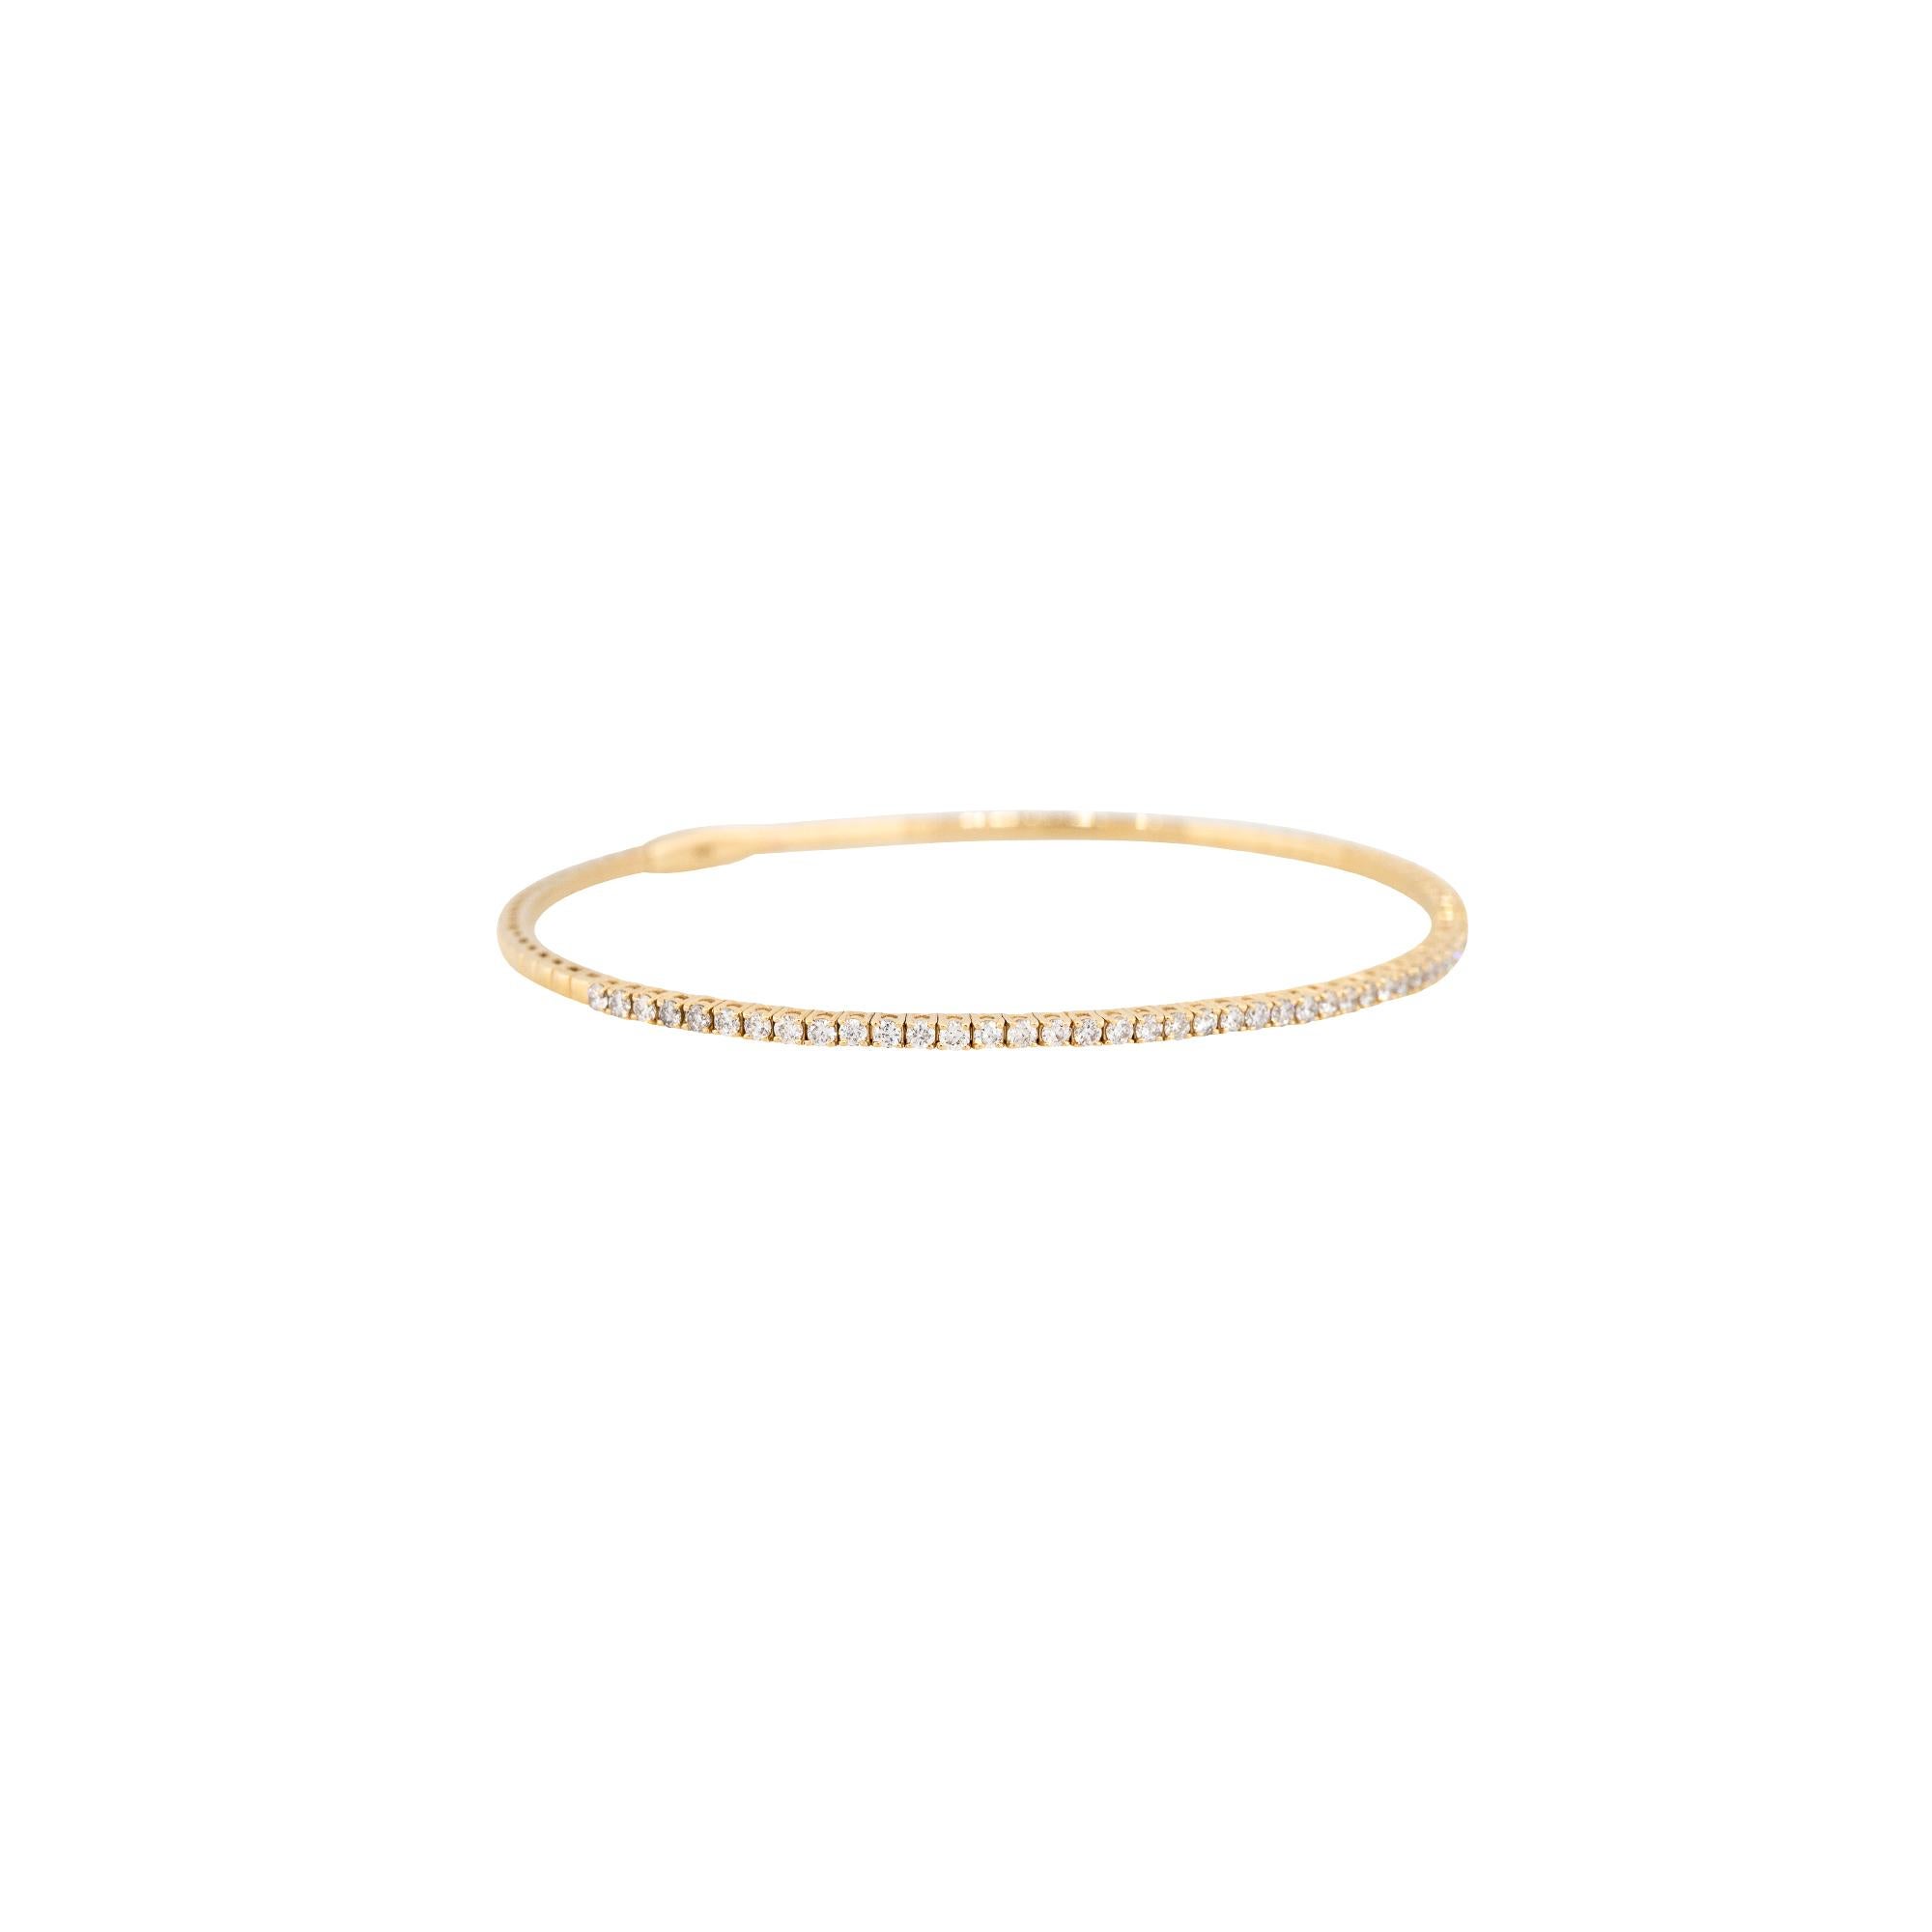 14k Yellow Gold 0.95ctw Flexible Diamond Stackable Bangle Bracelet

Material: 14k Yellow Gold
Diamond Details: Approximately 0.95ctw of Round Brilliant Diamonds. There are 51 Diamonds total. Diamonds are approximately G/H in Color and SI in